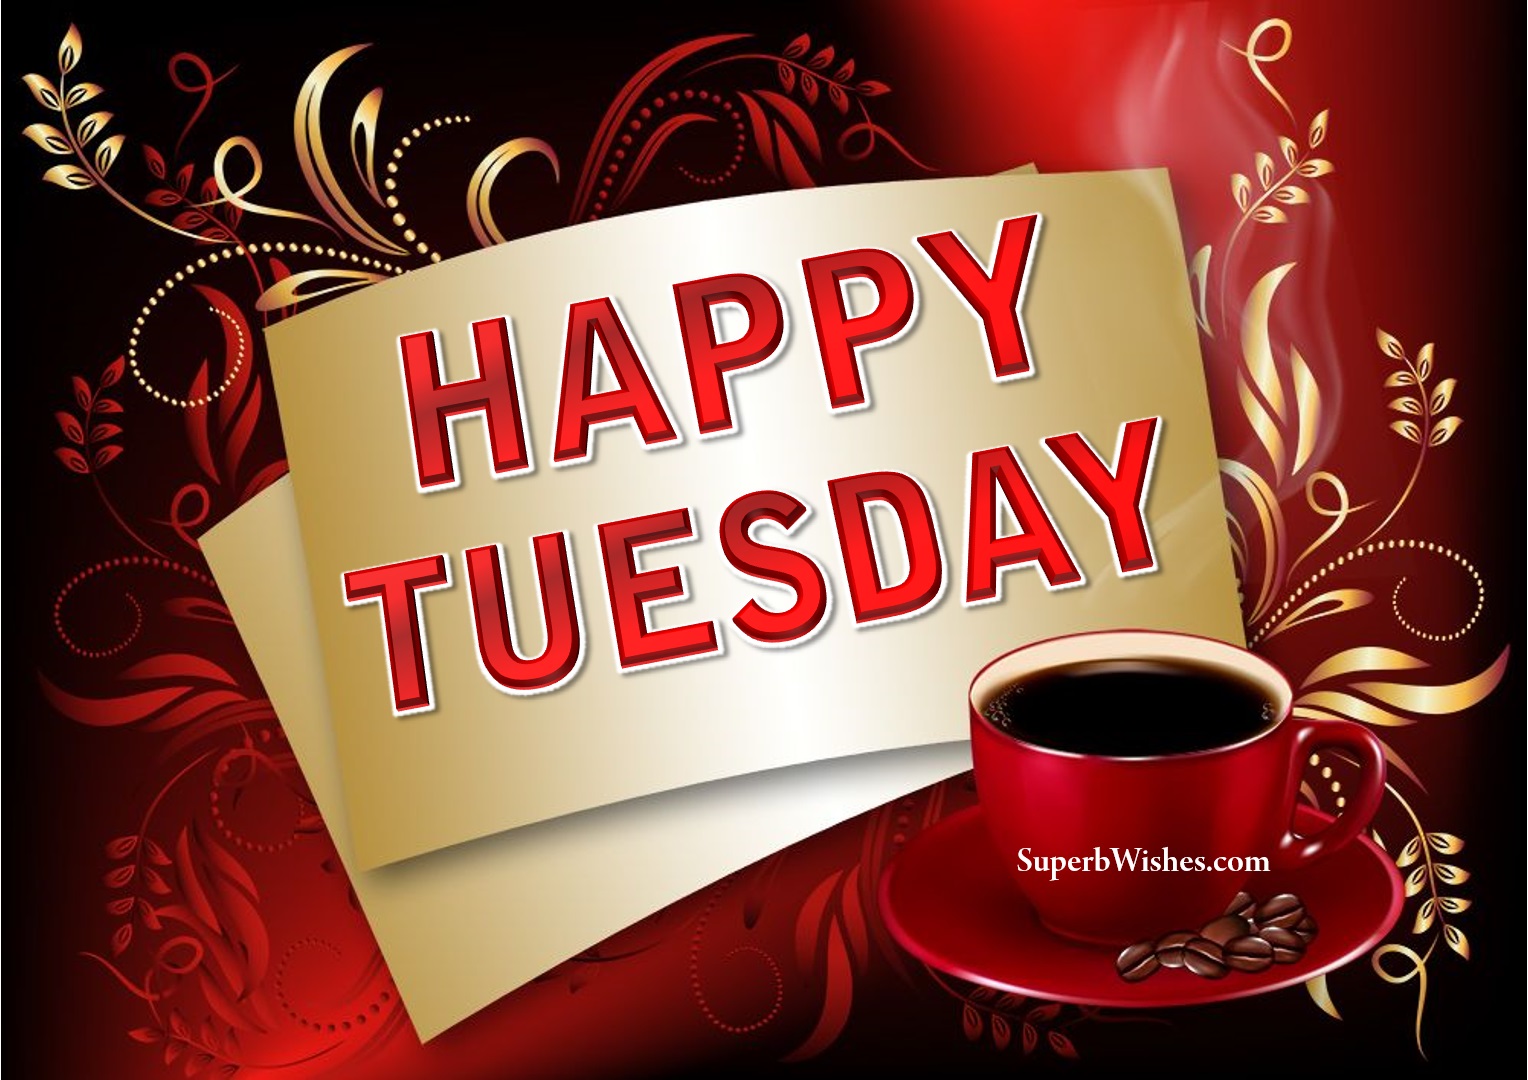 Happy Tuesday coffee images. Superbwishes.com